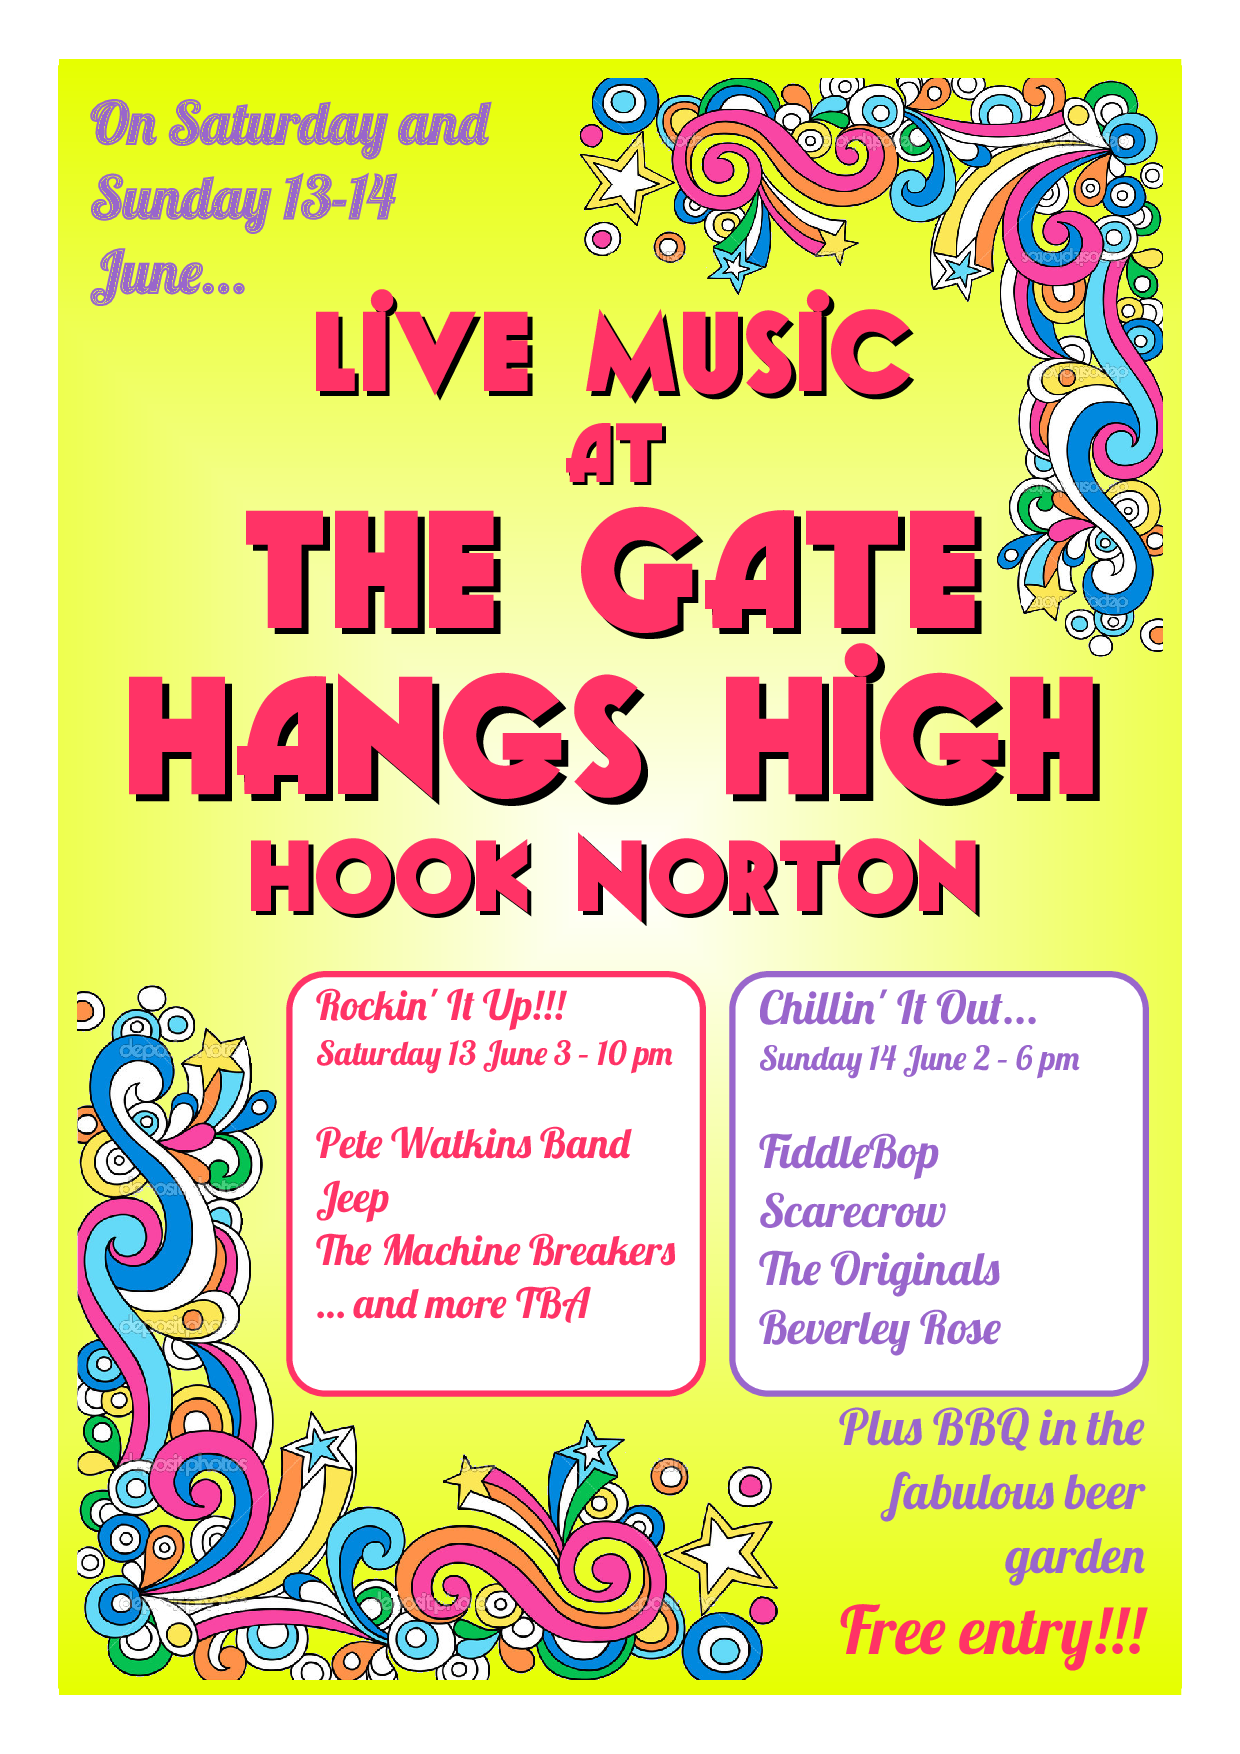 Live Music at The Gate Hangs High